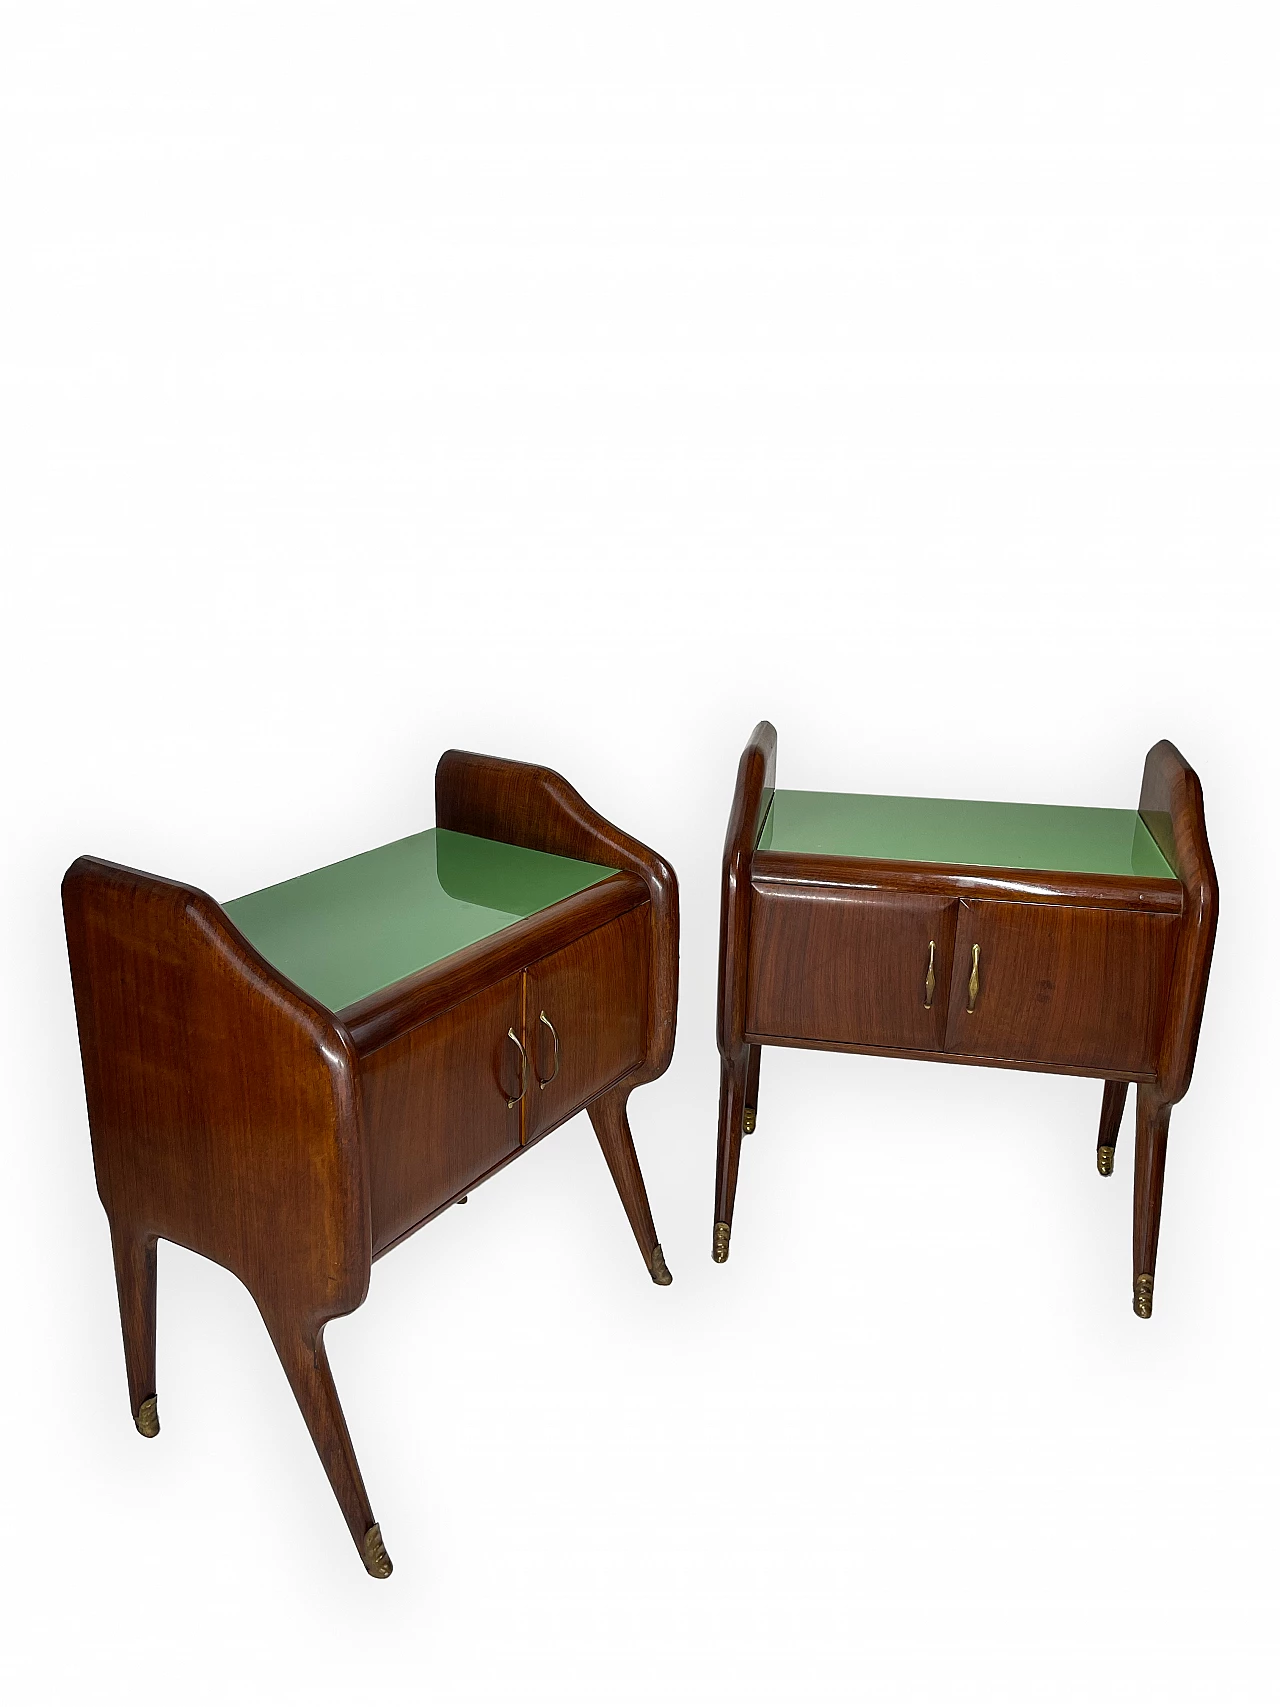 Pair of wooden bedside tables with green glass top, 1950s 3